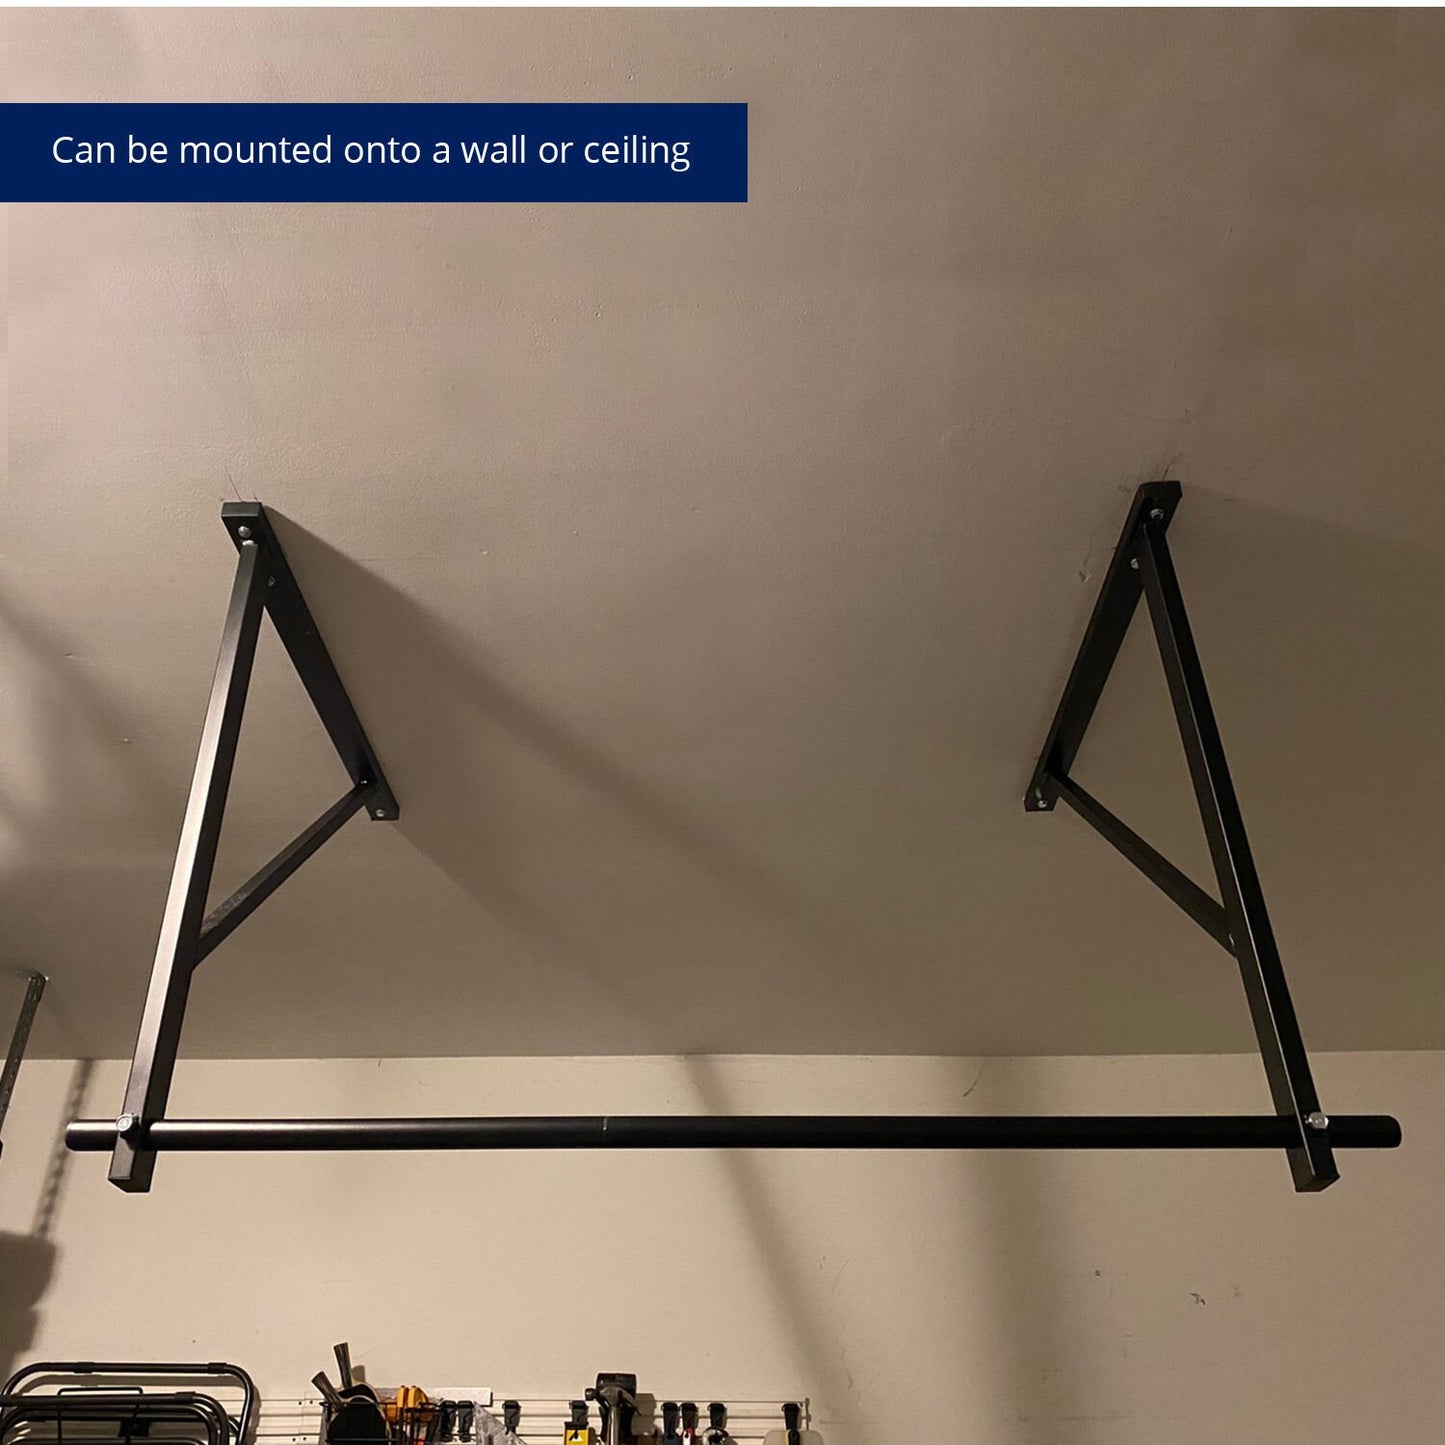 Wall-Mounted Pull-Up Bar - view 3